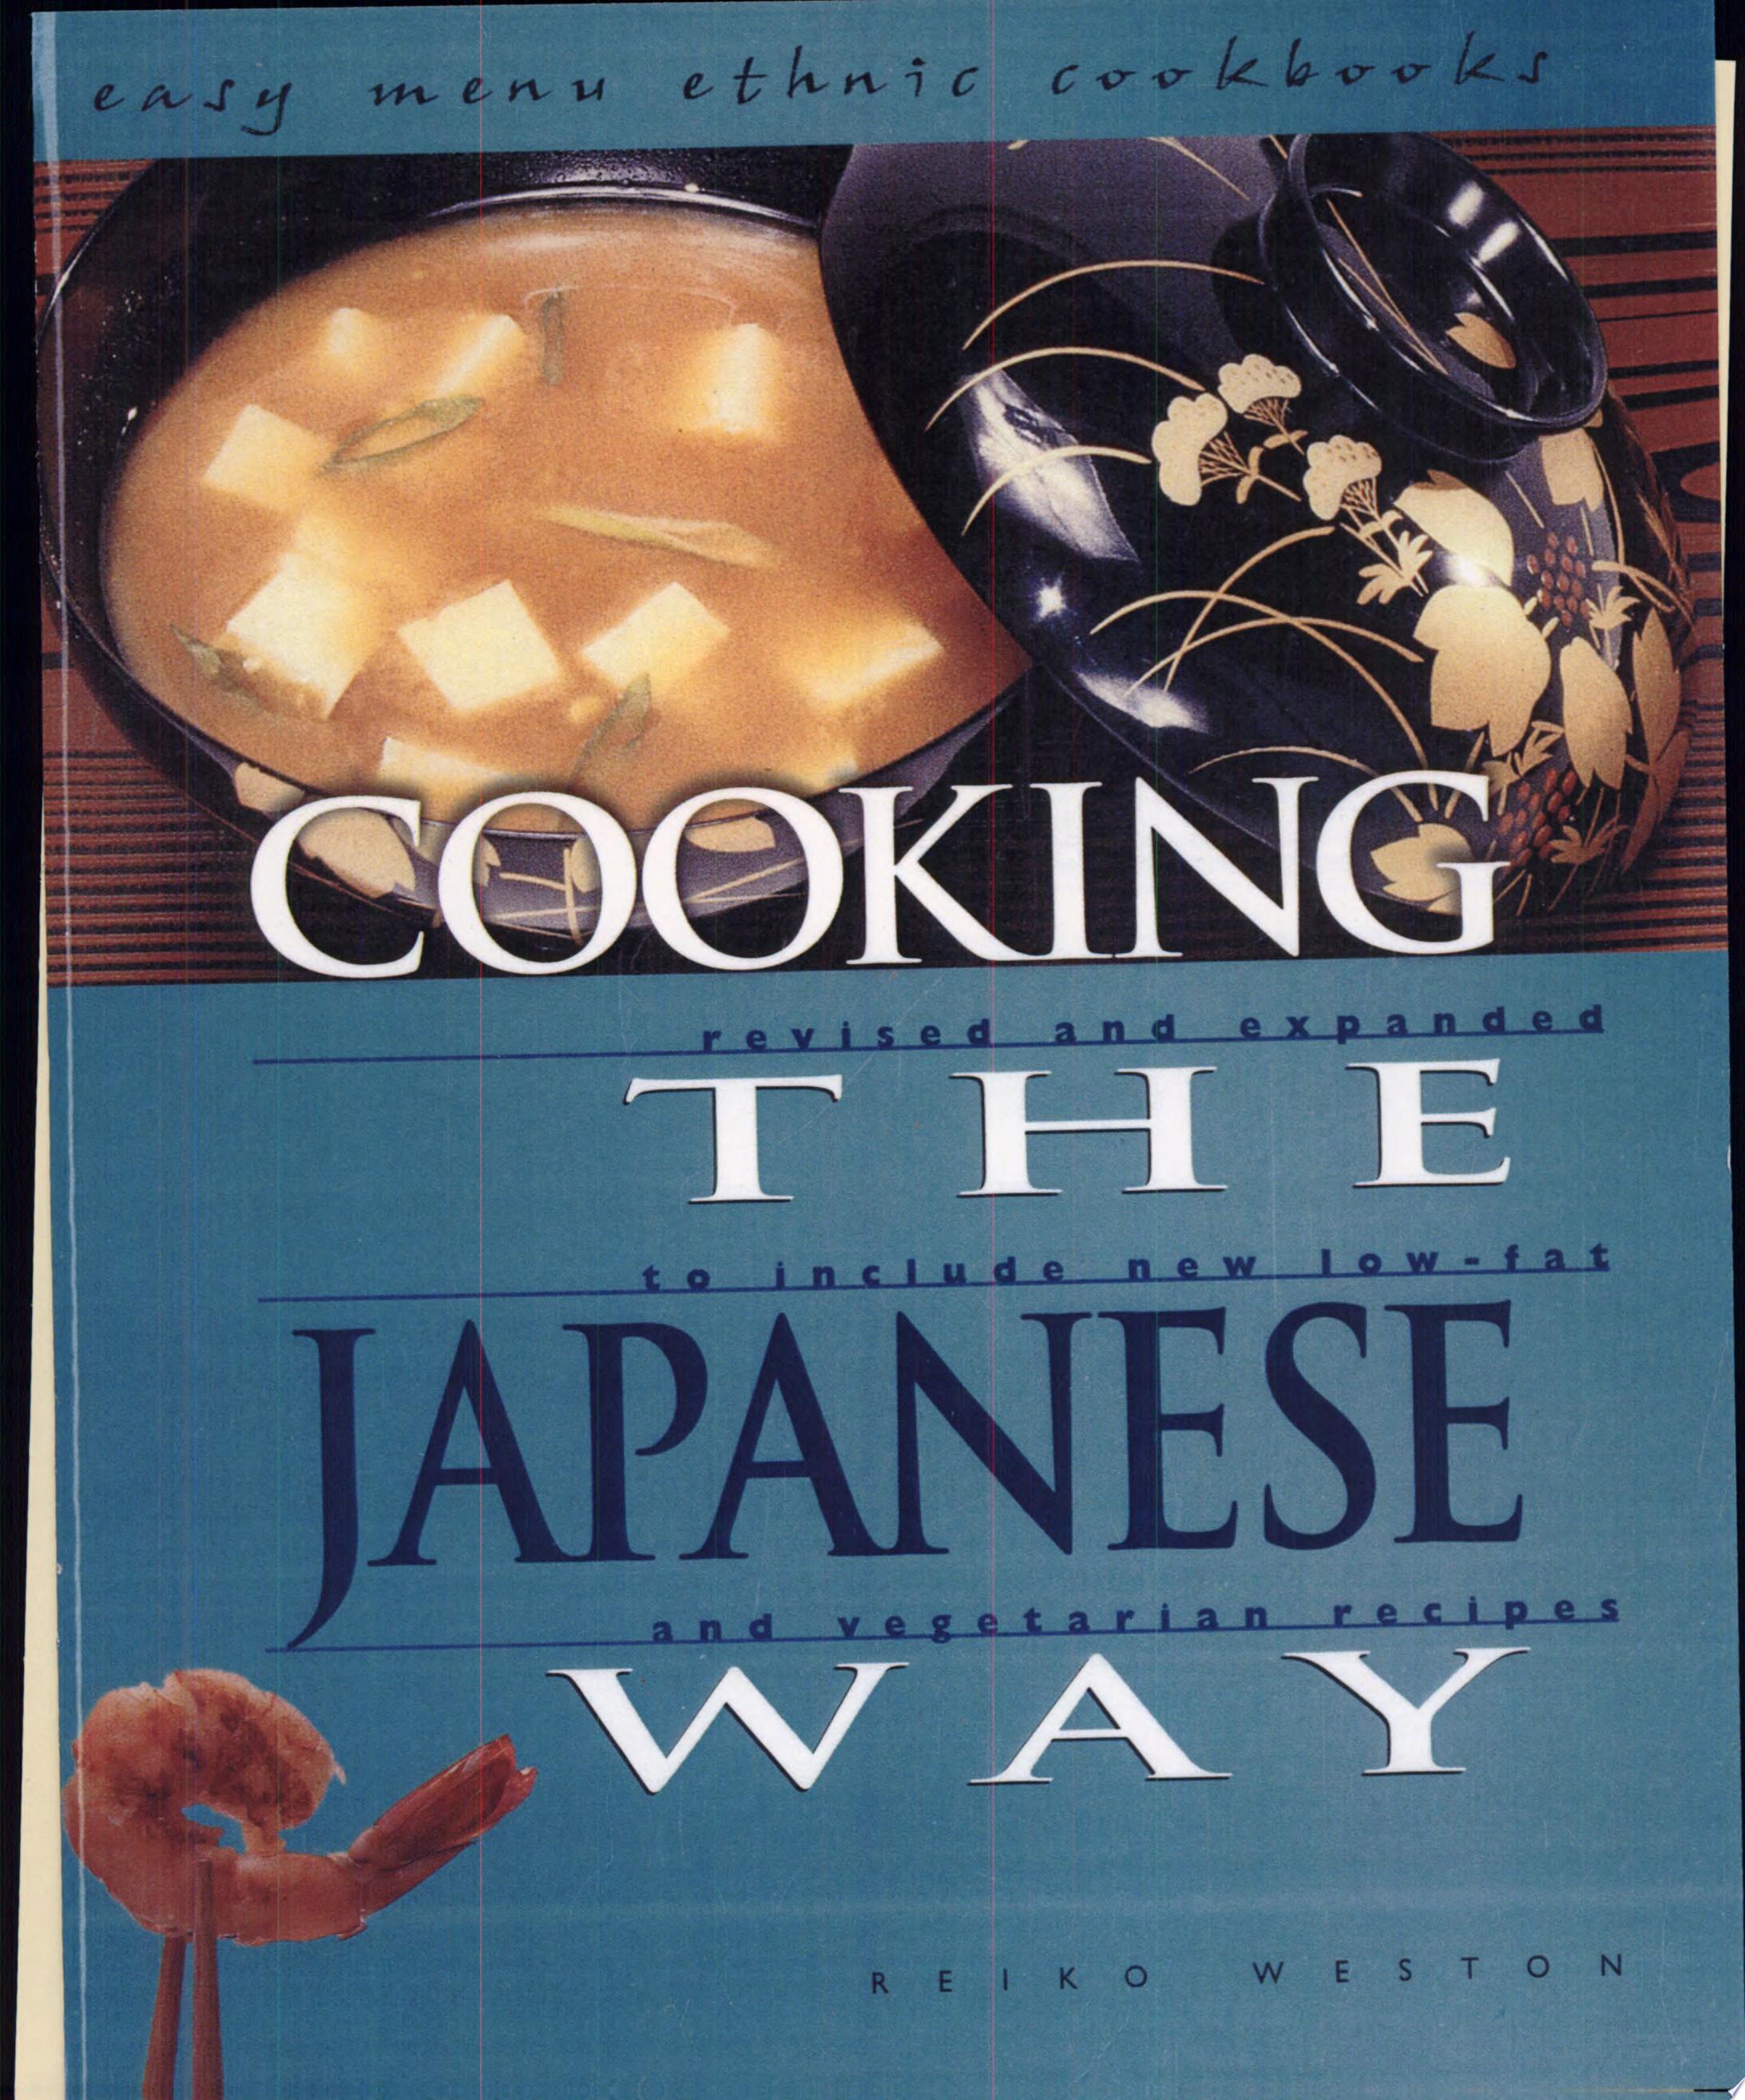 Image for "Cooking the Japanese Way"